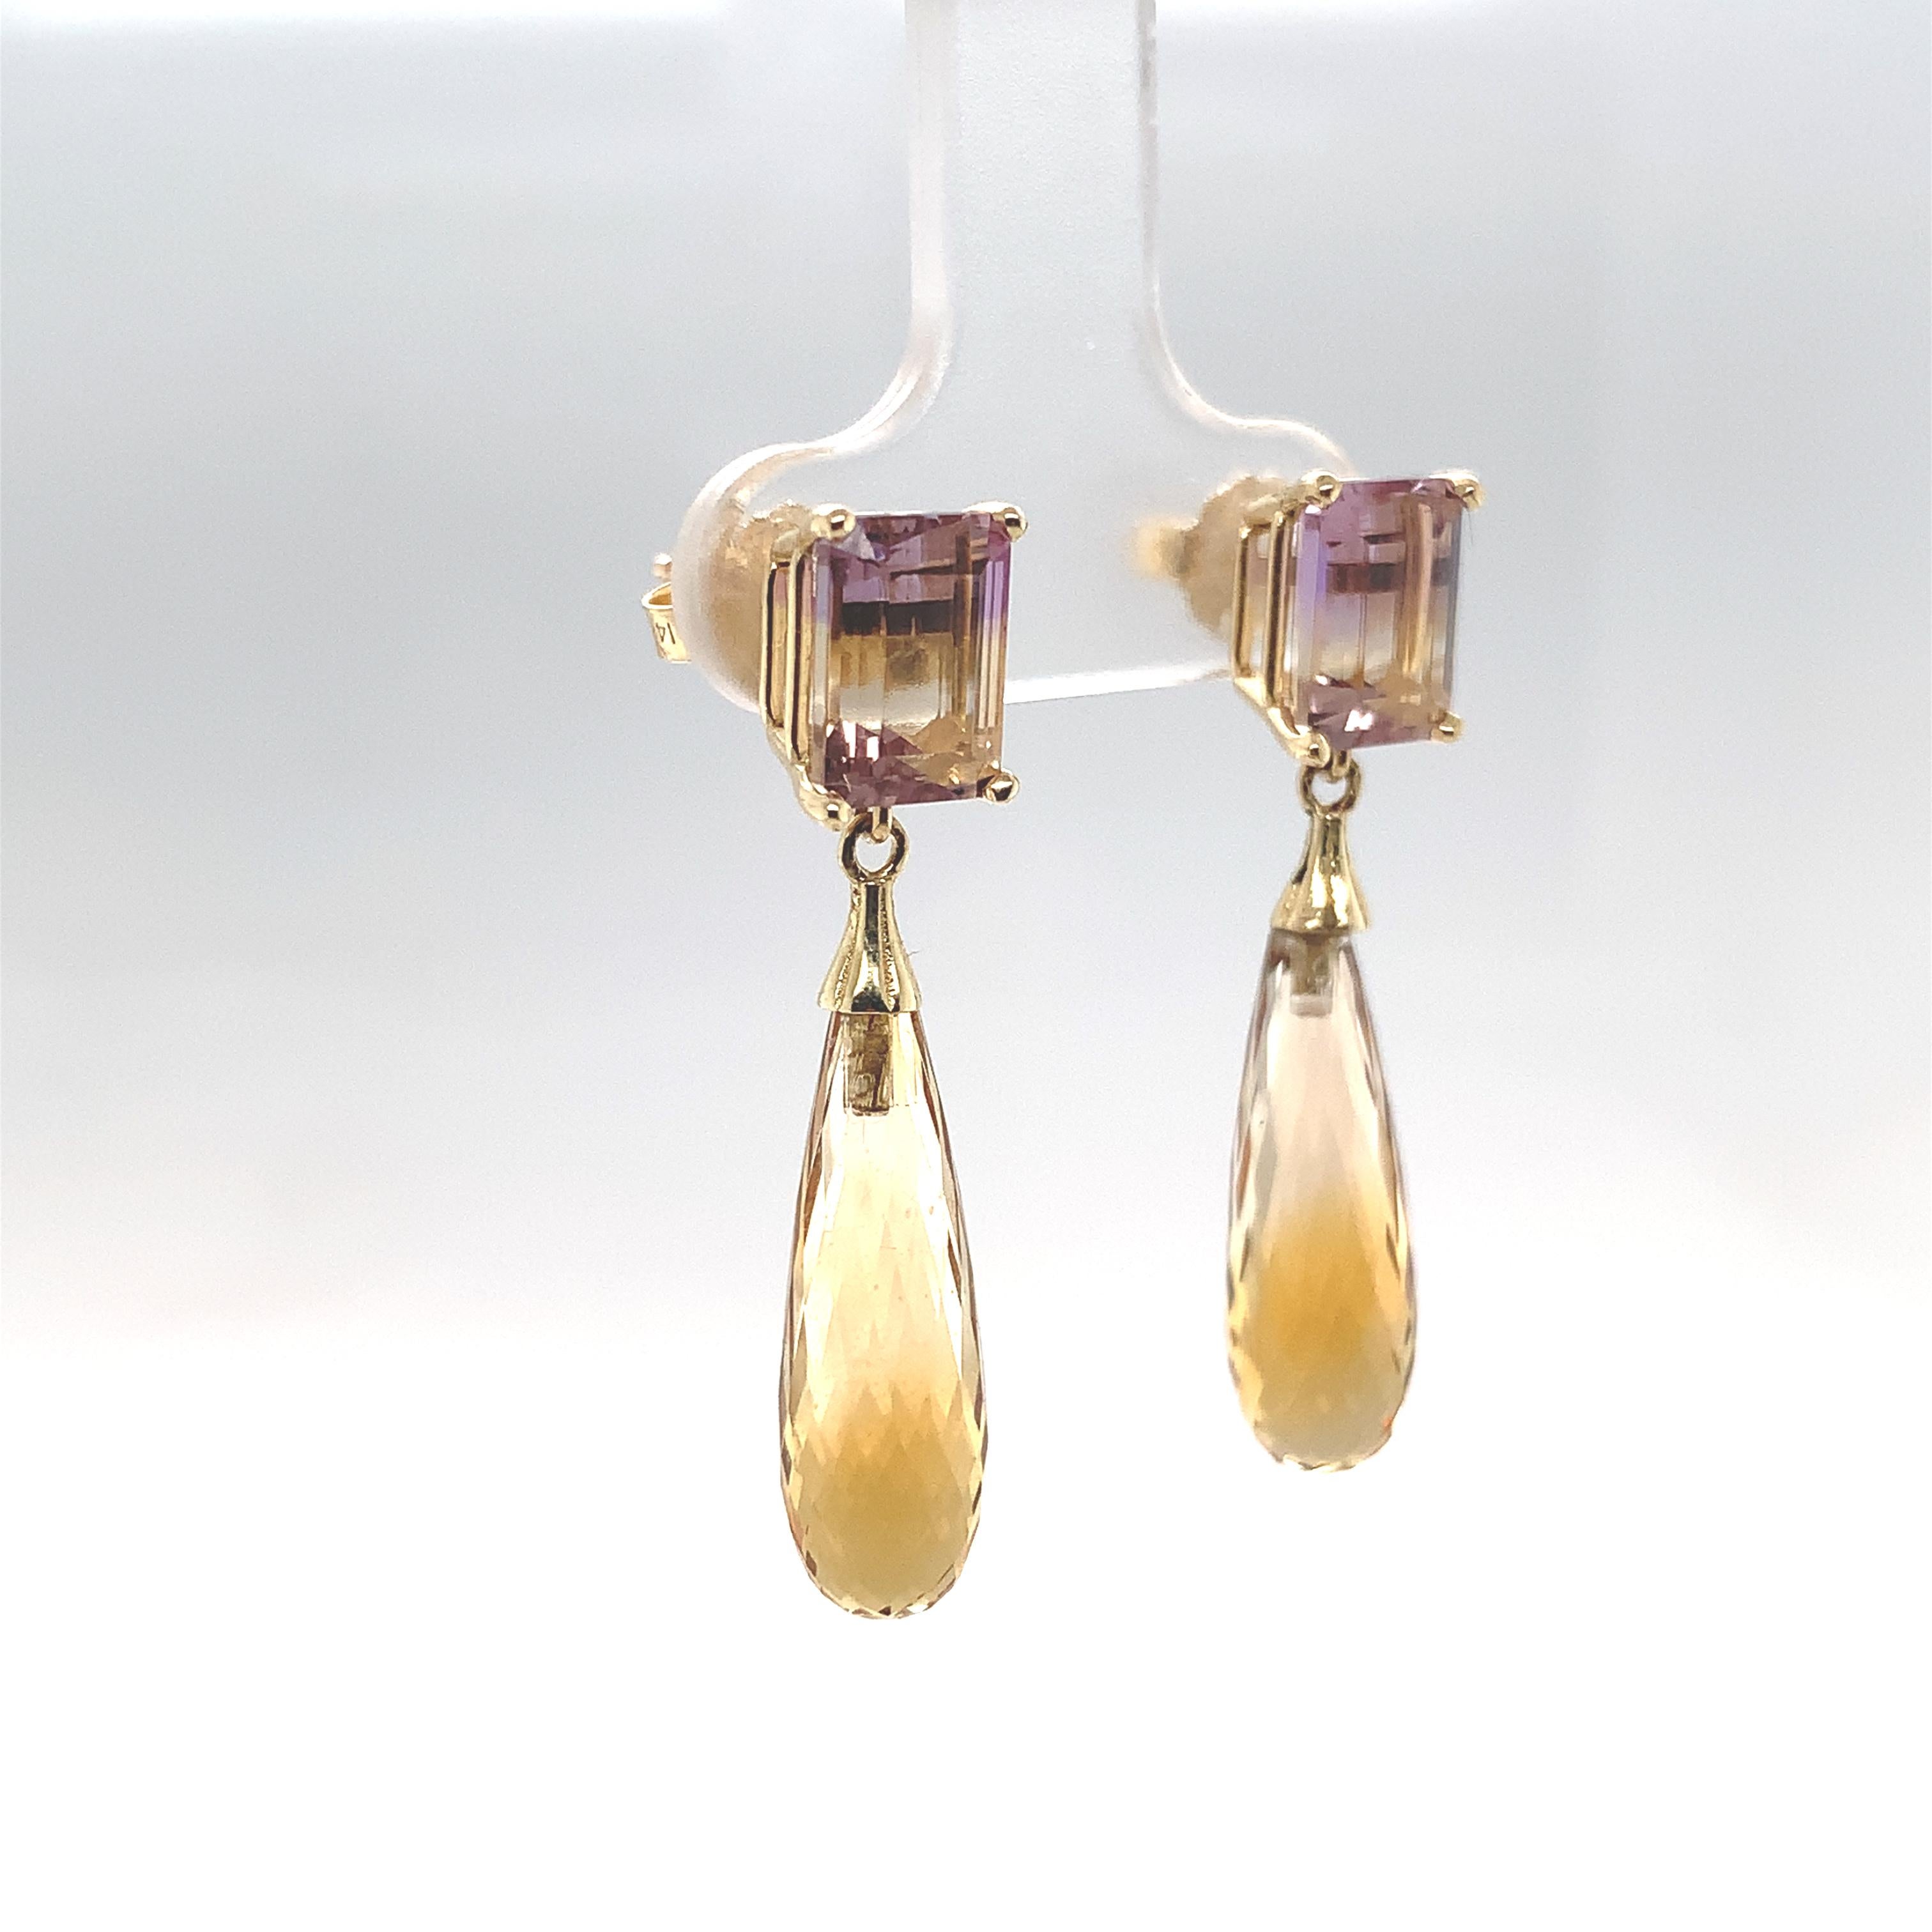 A pair of 14K yellow gold drop earrings with emerald cut ametrine and briolette citrine. The earrings have post with clutch backs. They measure 1 1/4